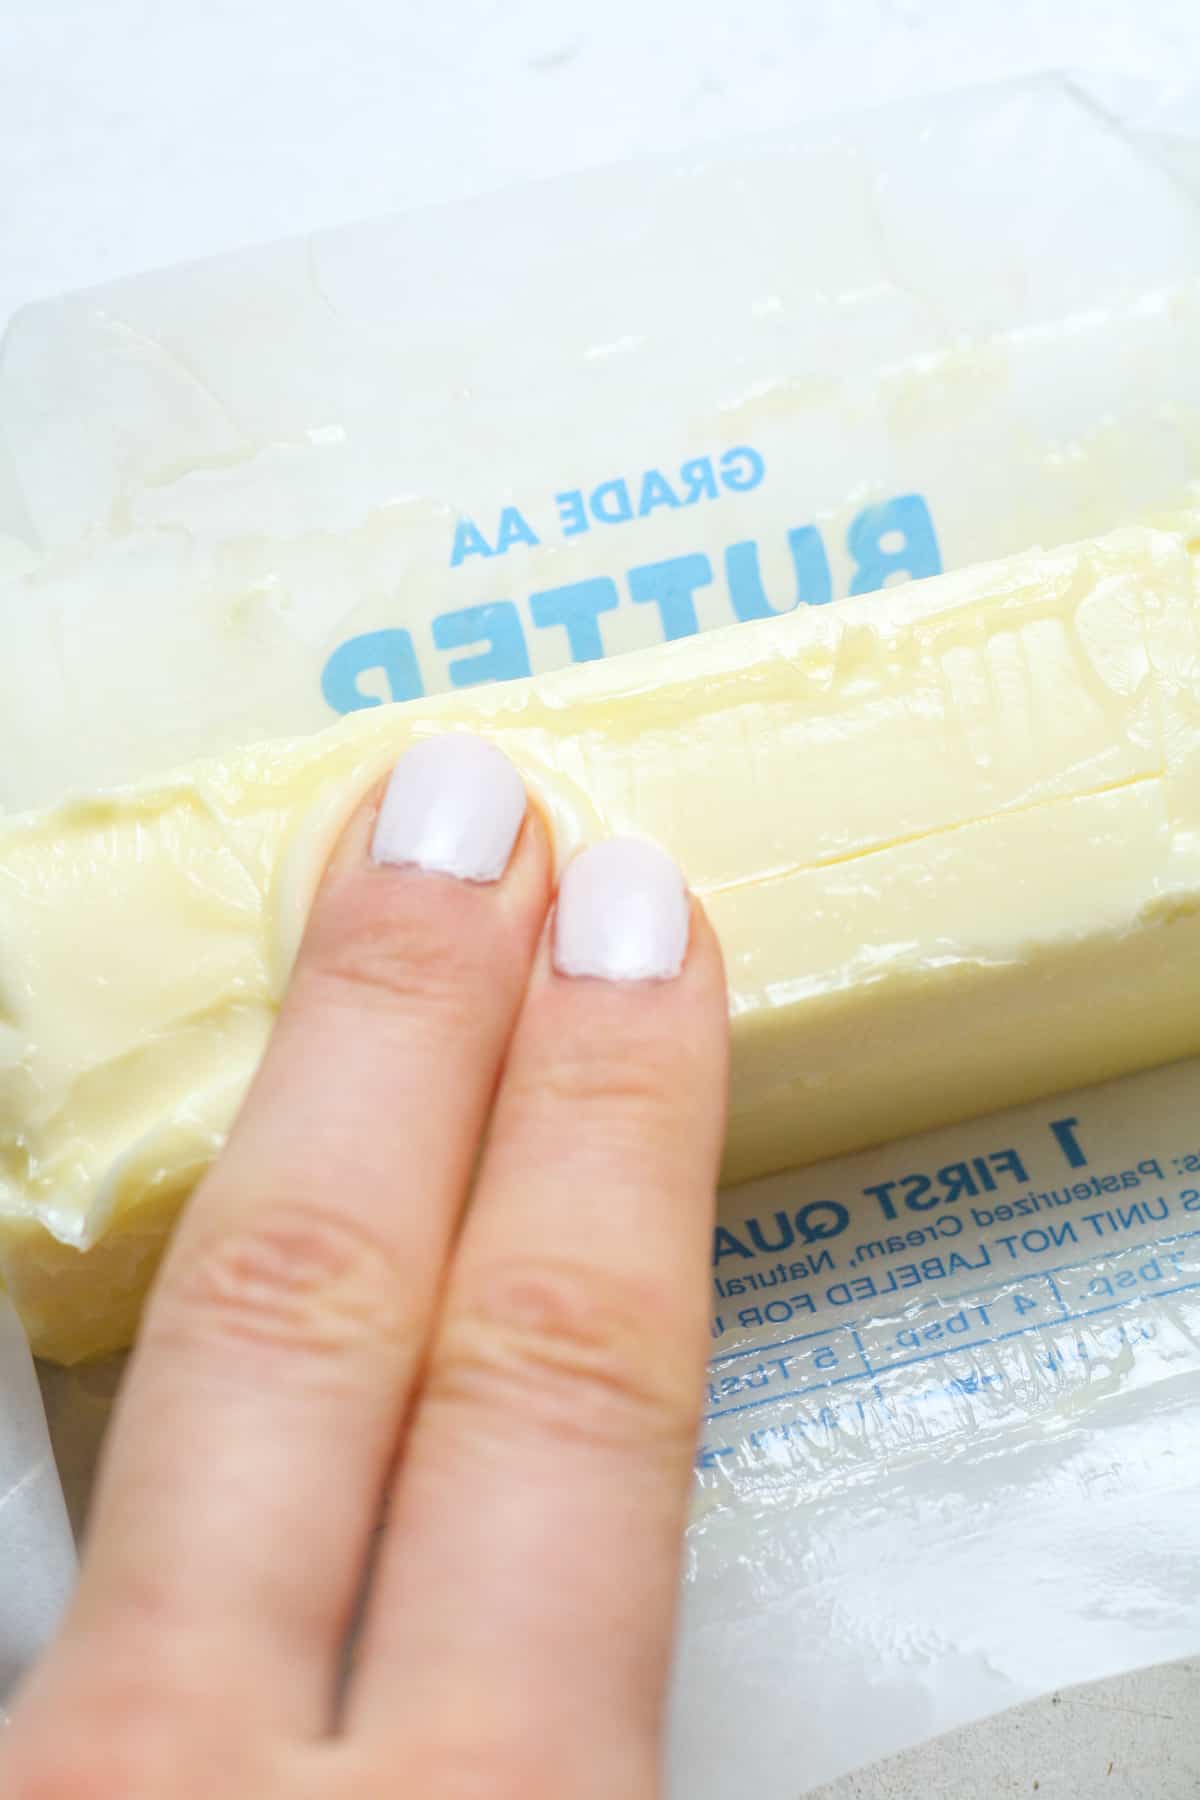 Fingers pressing into butter.